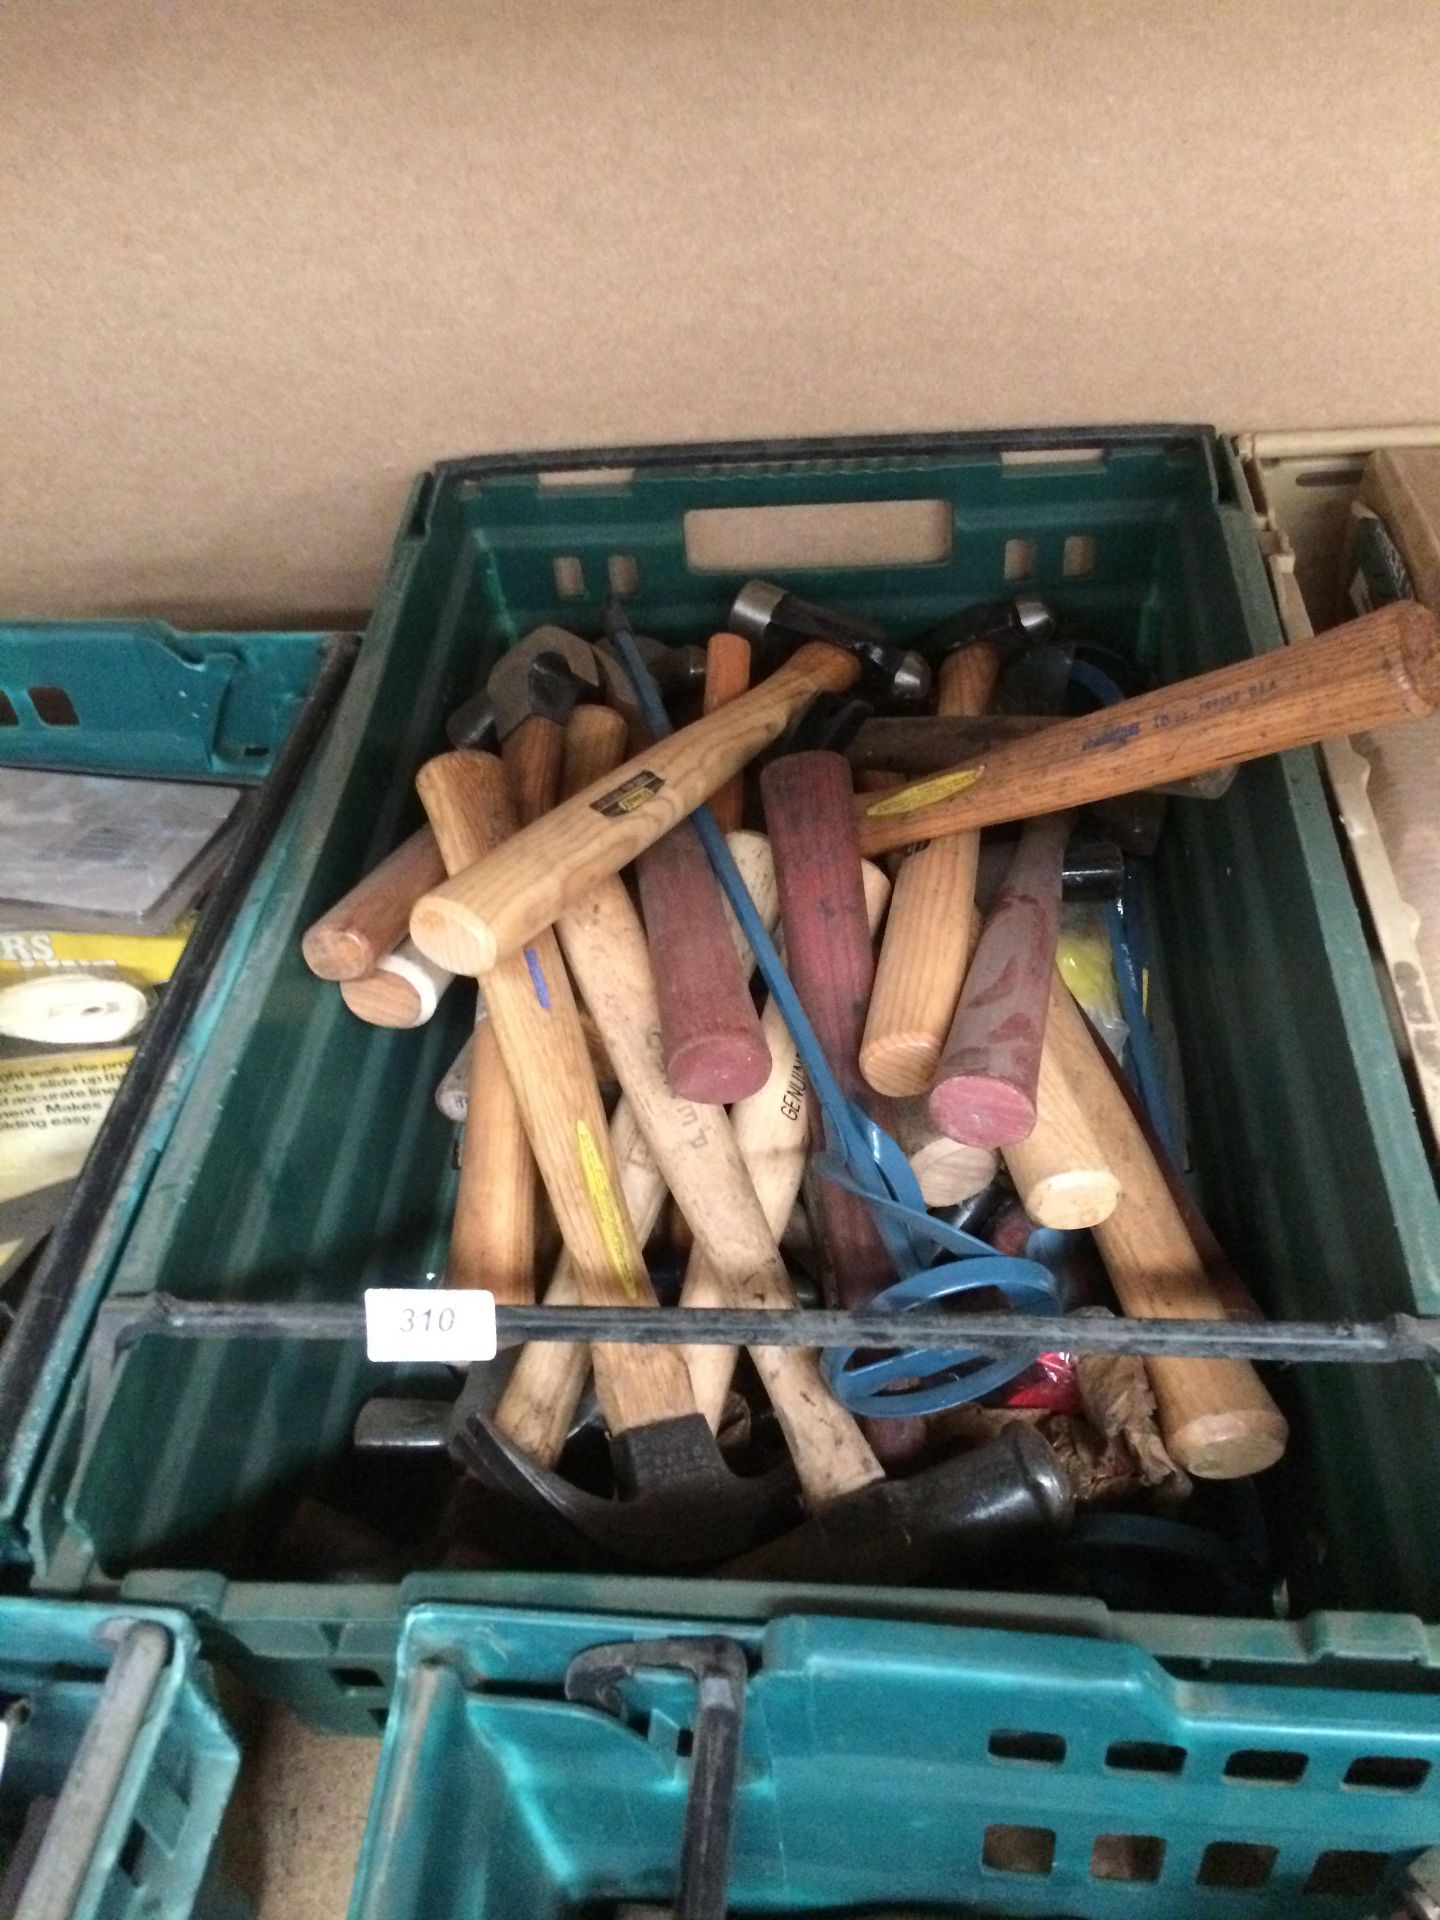 Contents to crate - hammers by Stanley, paint mixers etc.